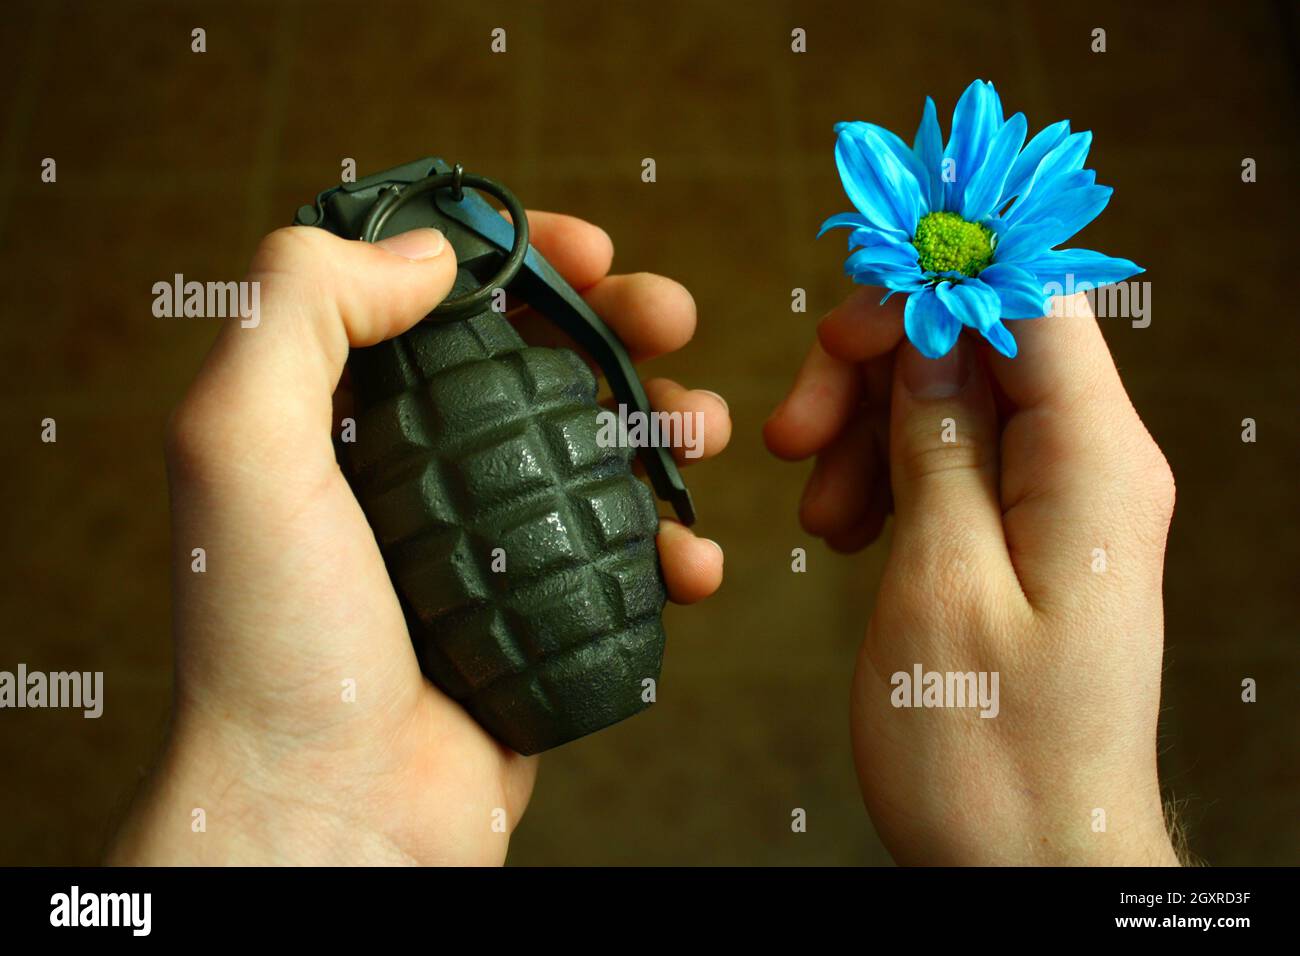 Two light-skinned hands - one holds a grenade and the other holds a blue and green daisy Stock Photo